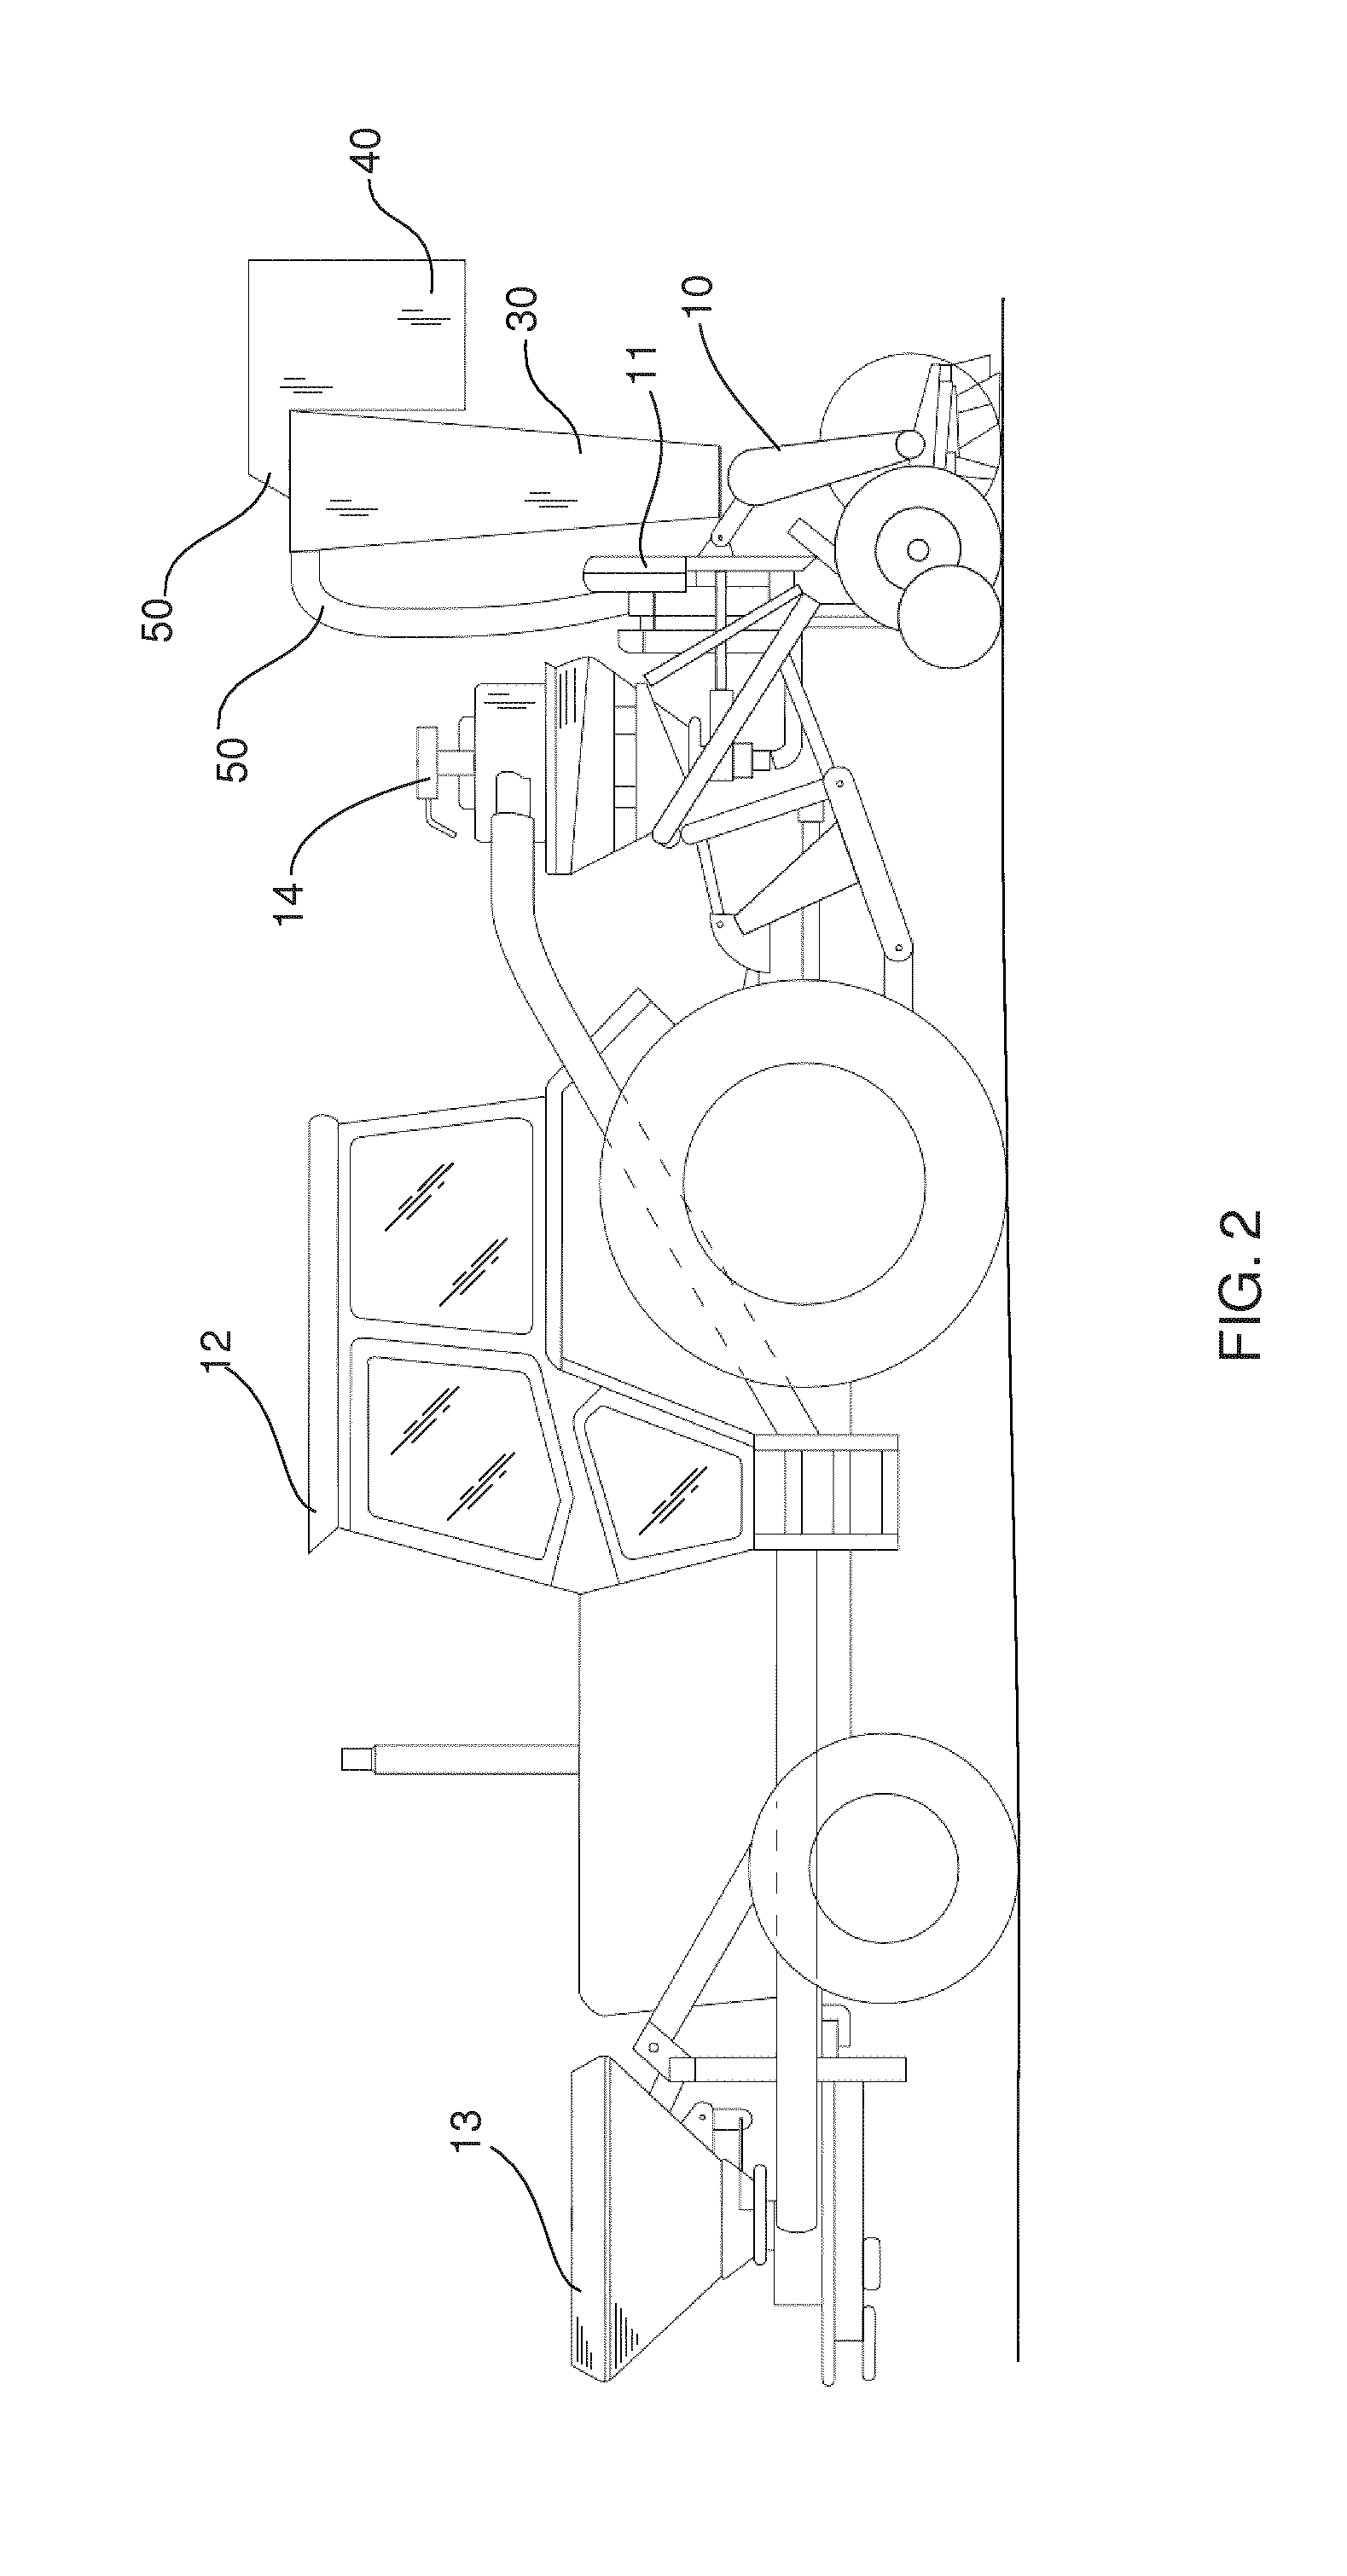 Planter Exhaust Air Removing Apparatus and Method of Use Thereof